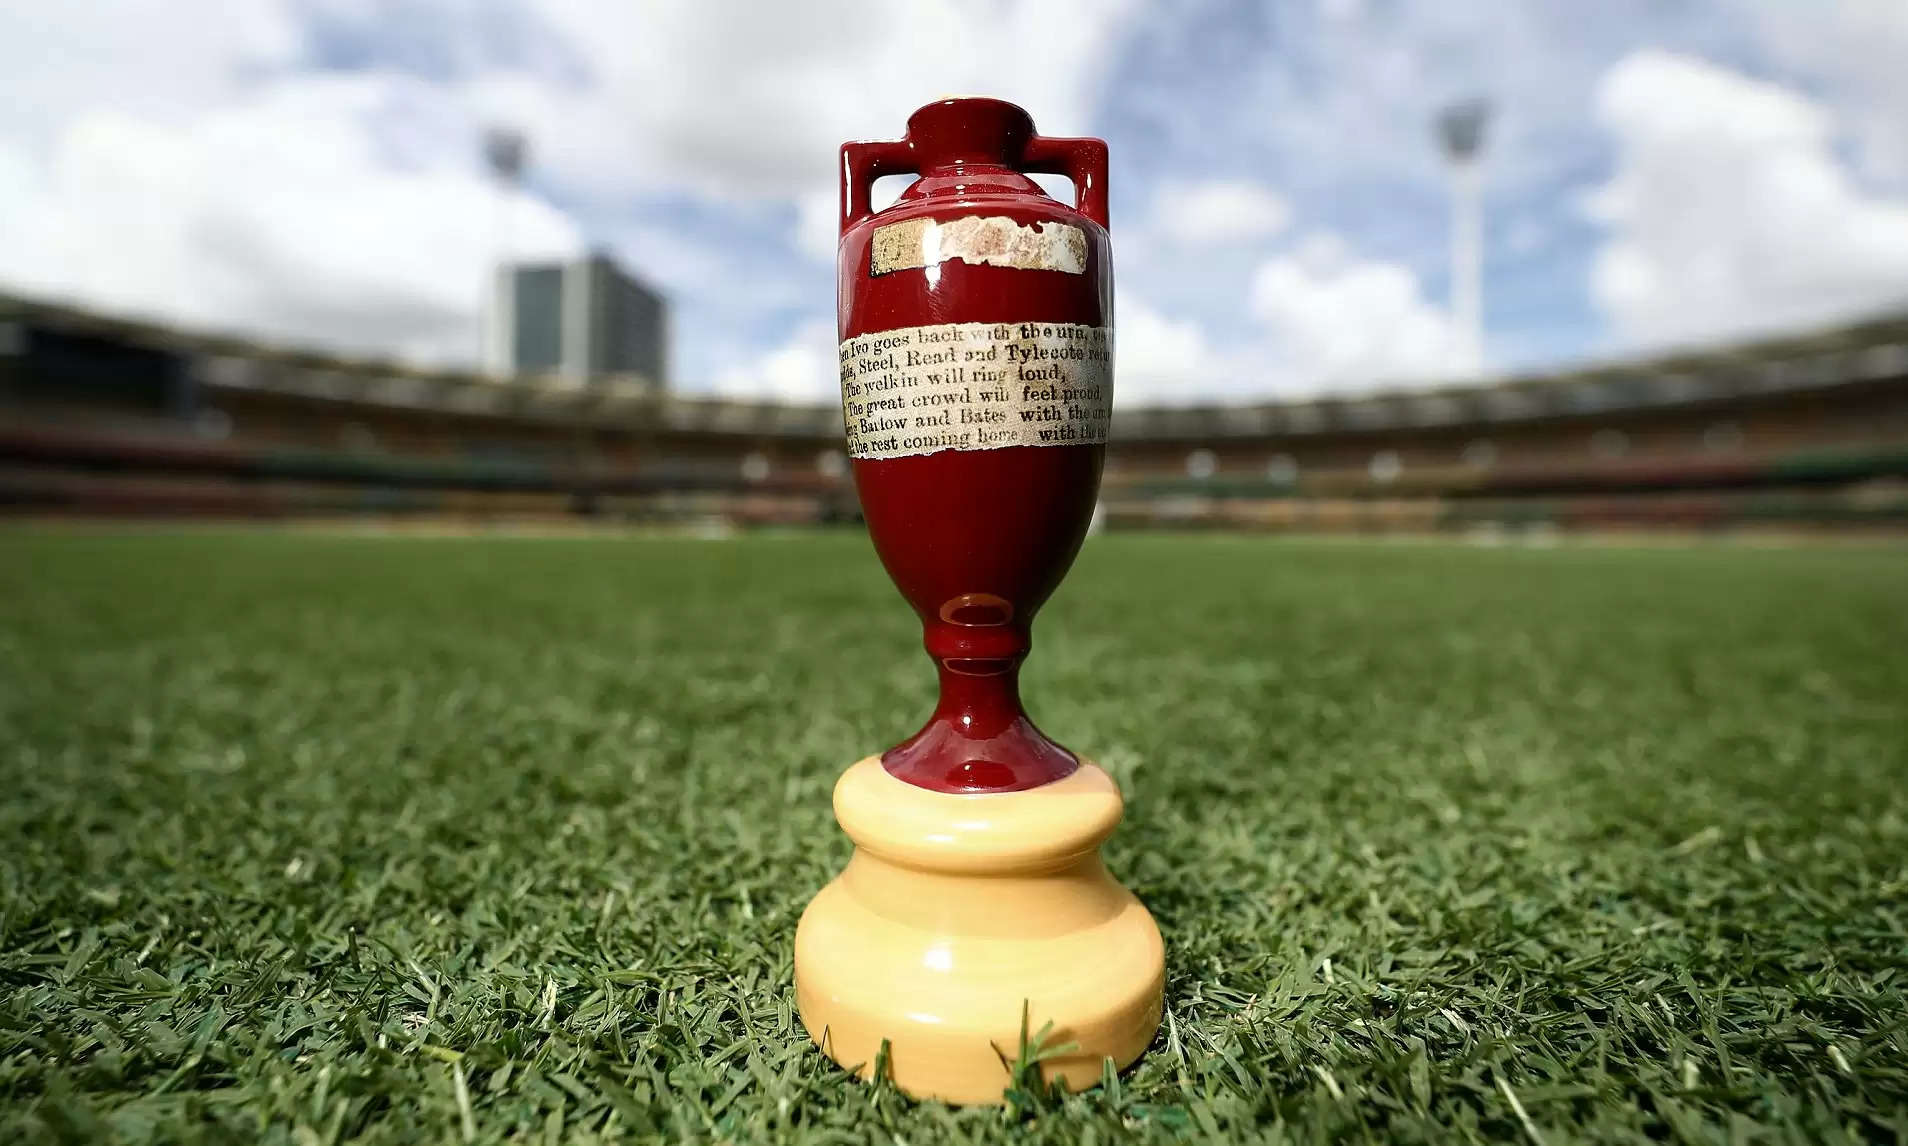 When and Where to watch The Ashes 2021-22 live on TV in India: Live streaming details of Australia vs England 2021-22 Test Series, Full Squads, Schedule and Time